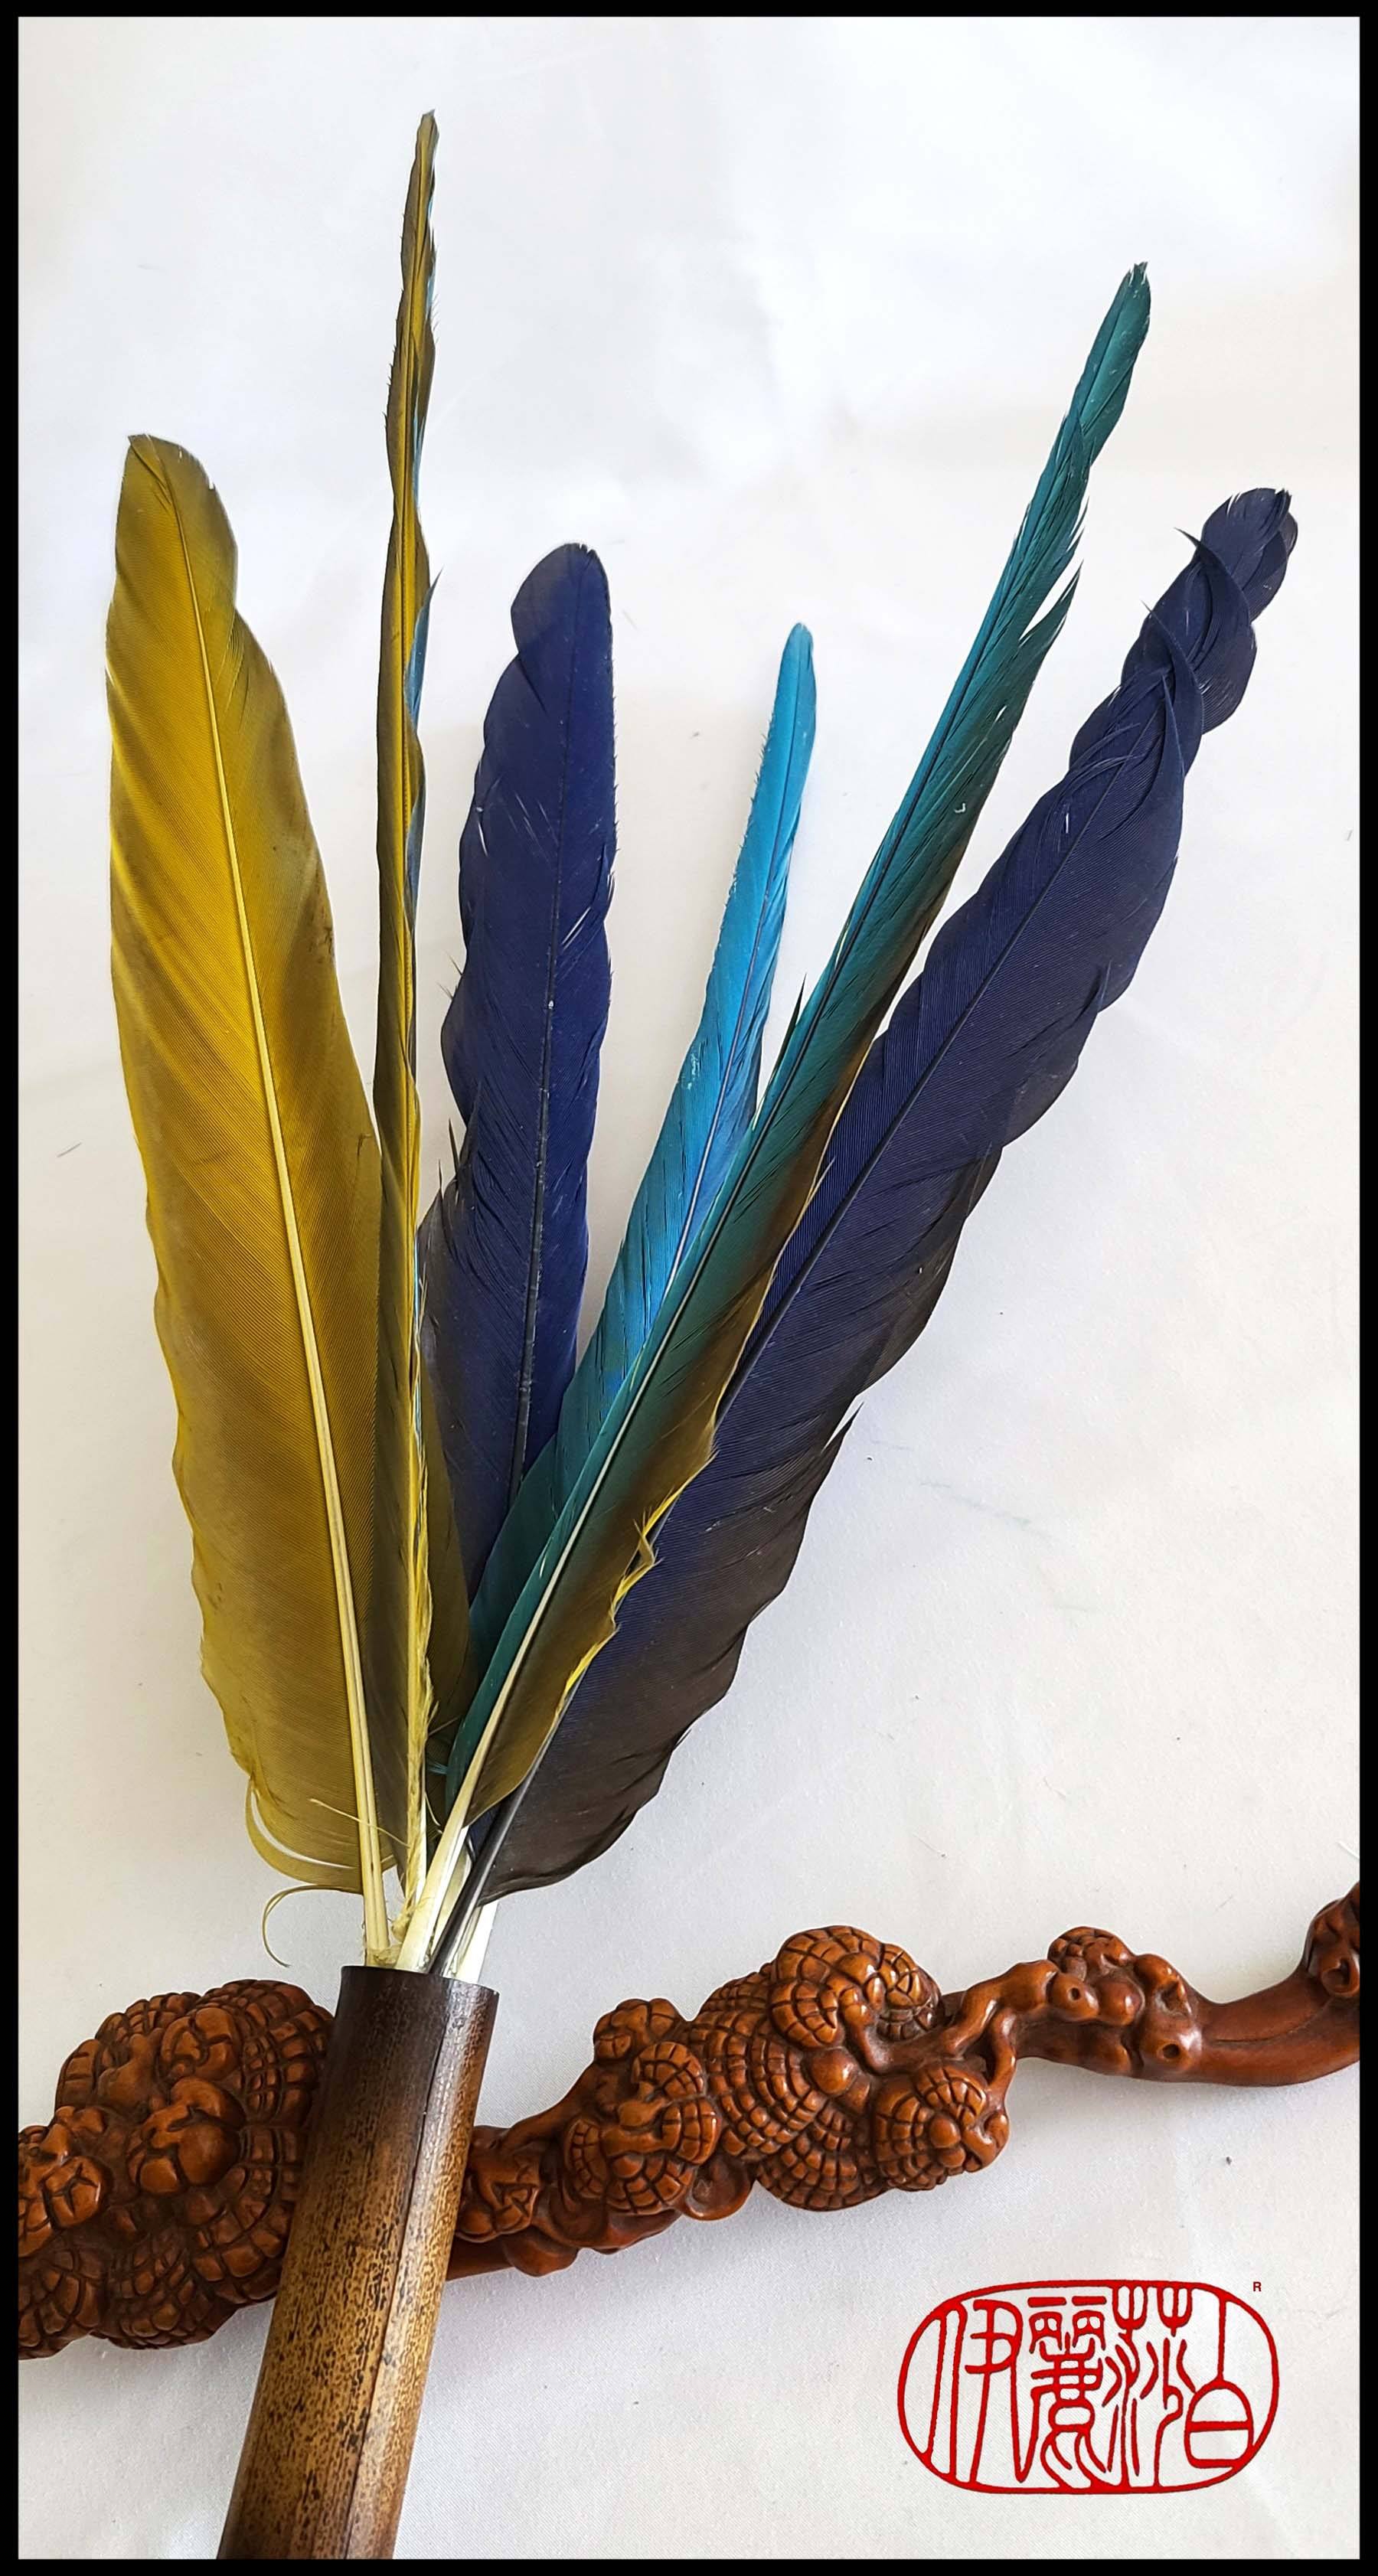 How to make a Feather Quill Pen